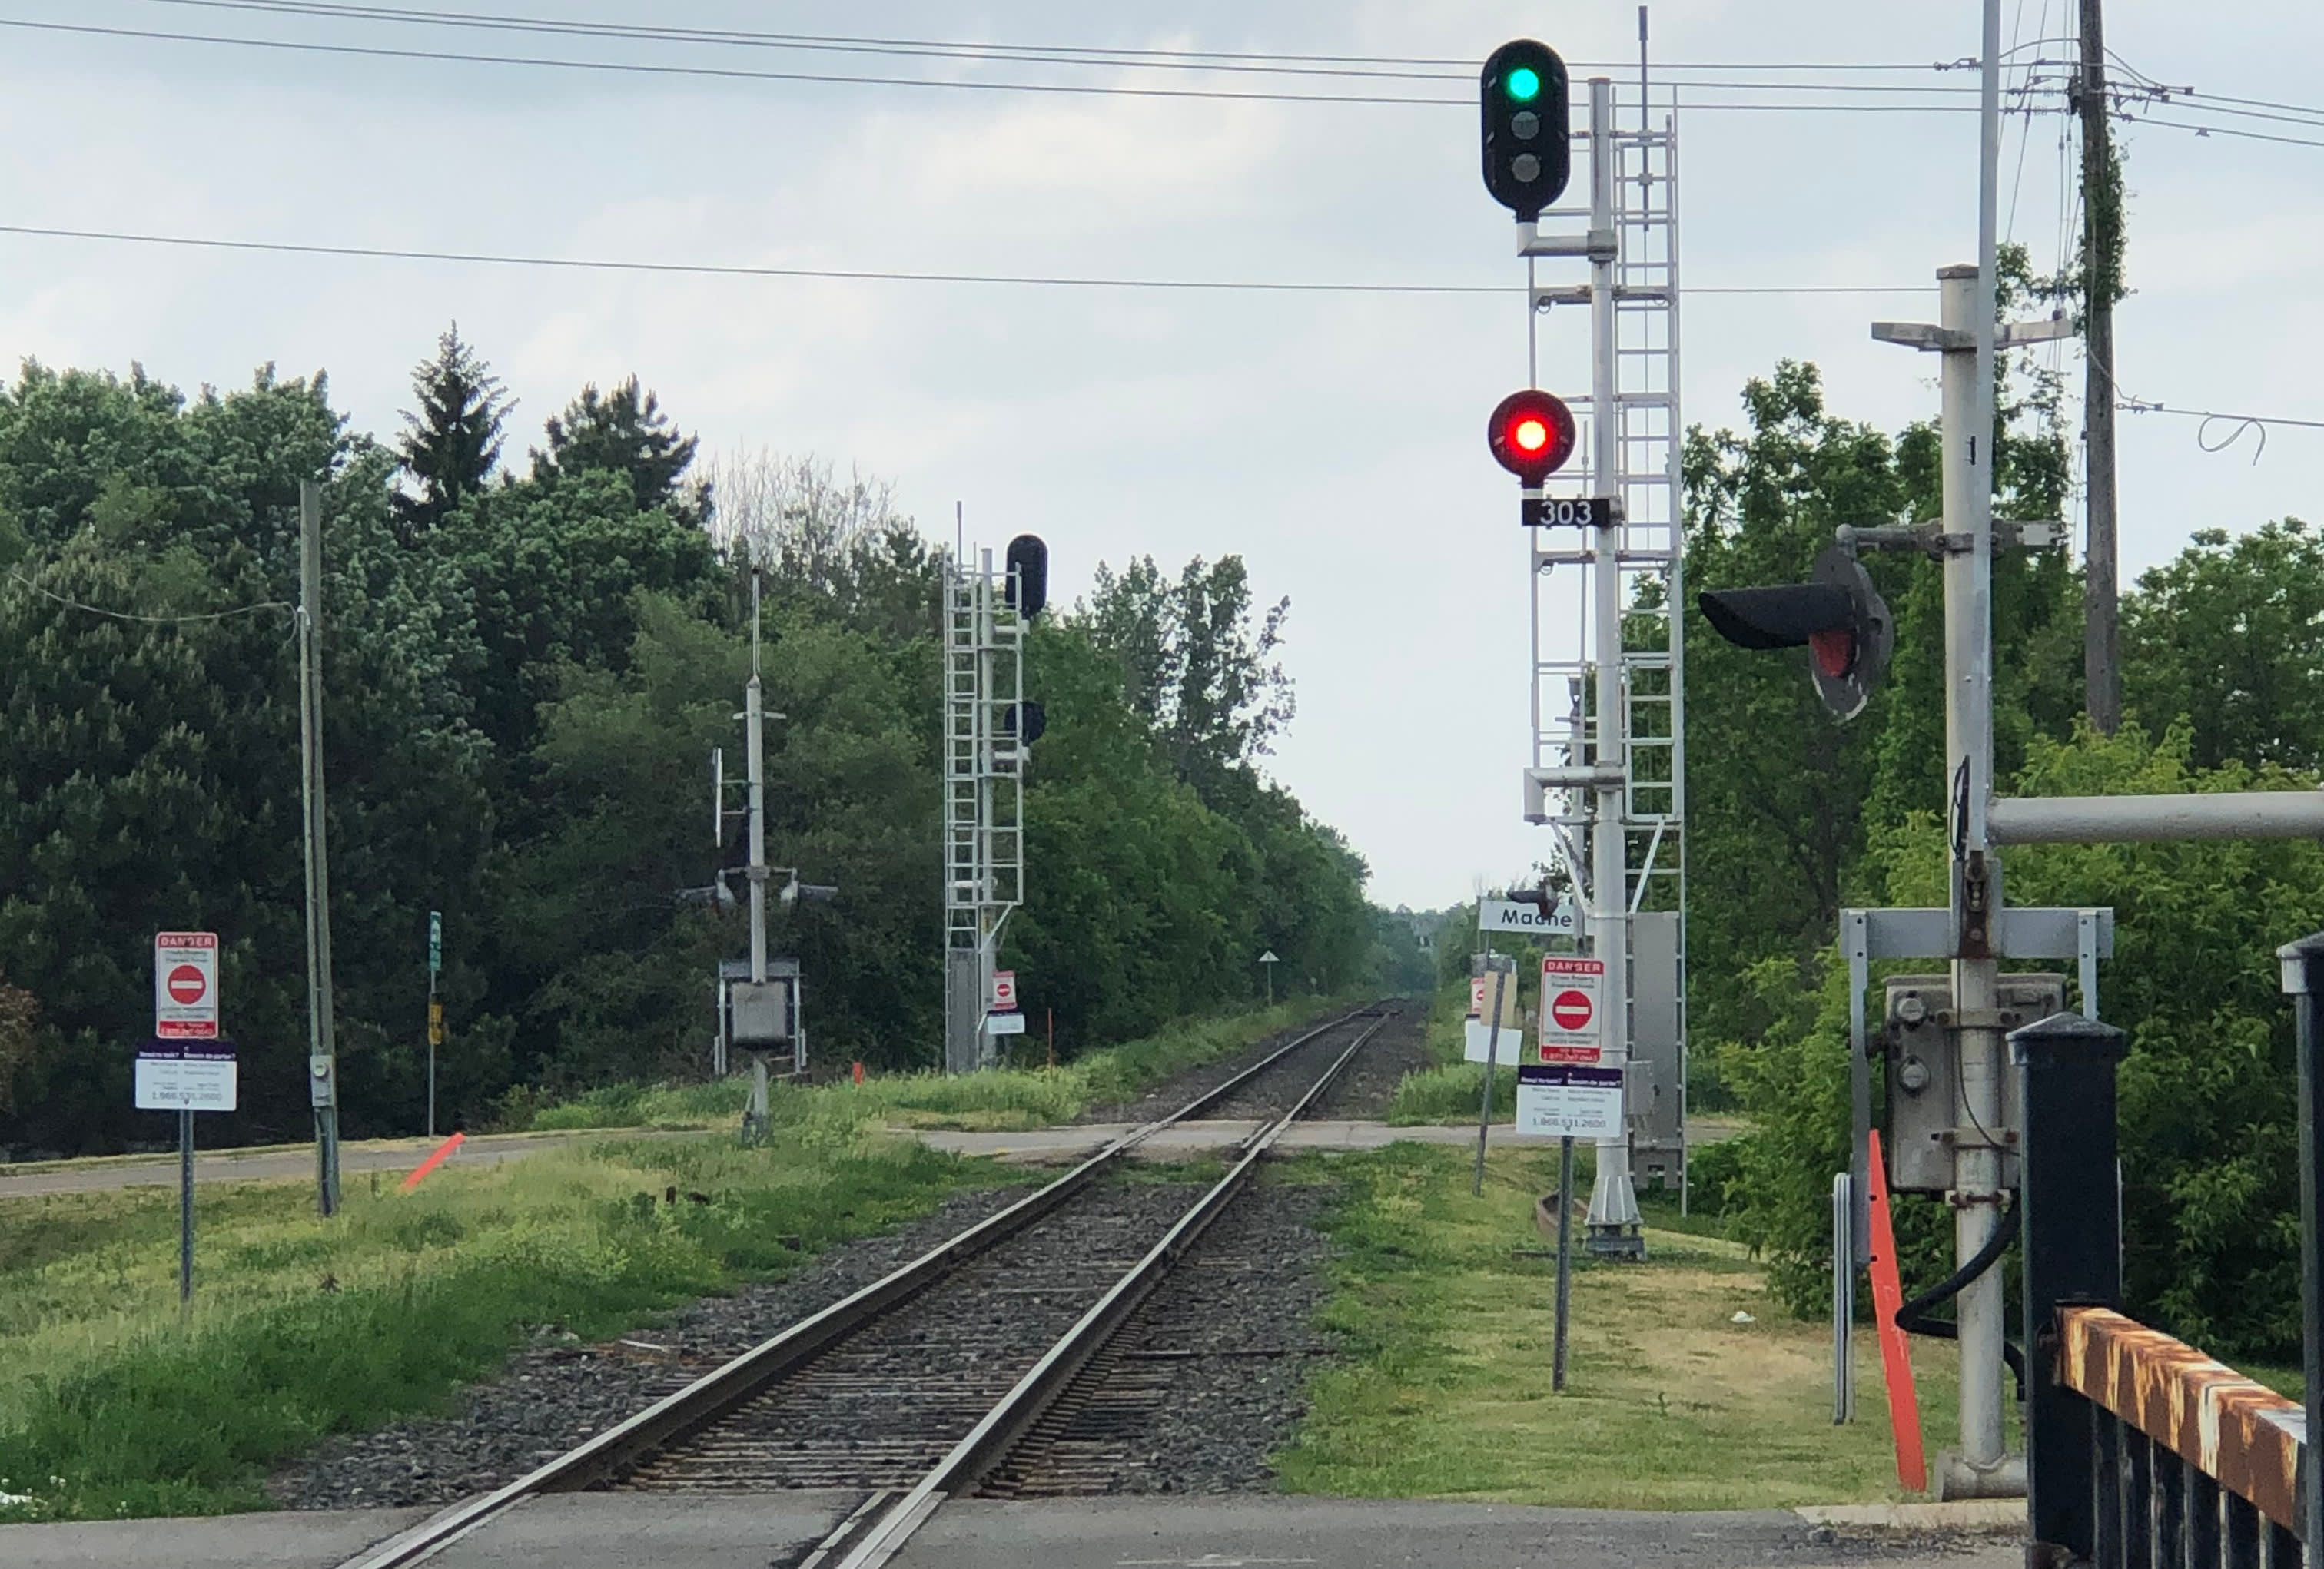 A level crossing with signal tower indicators in the background